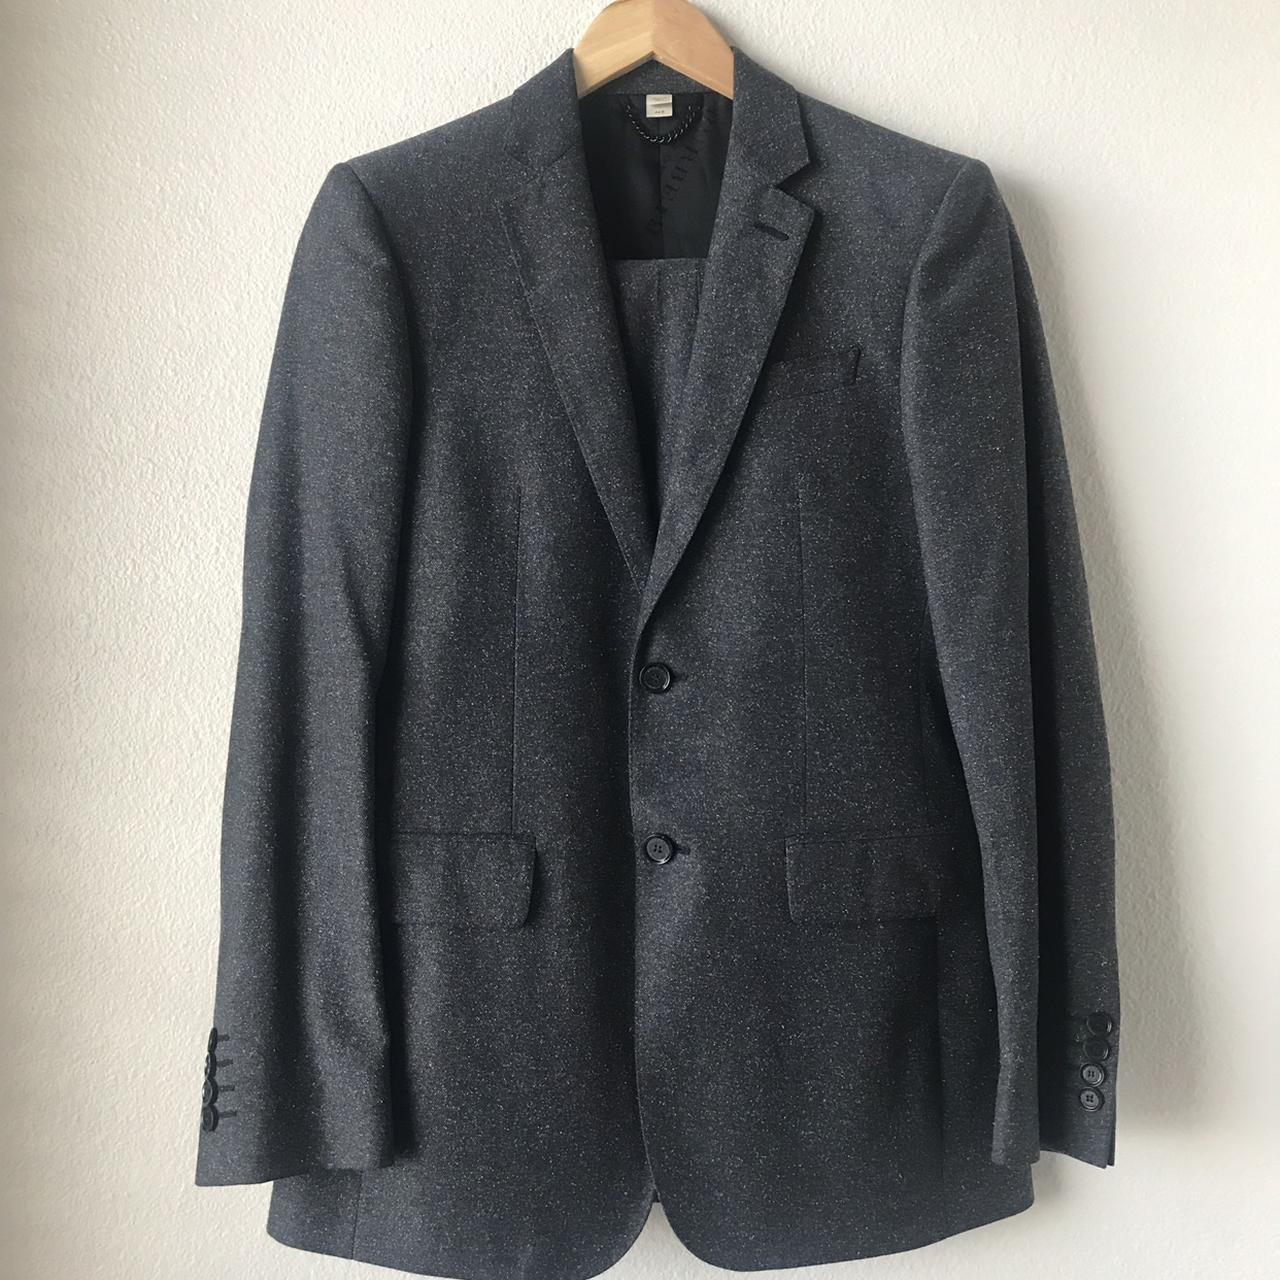 PERFECT CONDITION BURBERRY SUIT! Only worn once.... - Depop